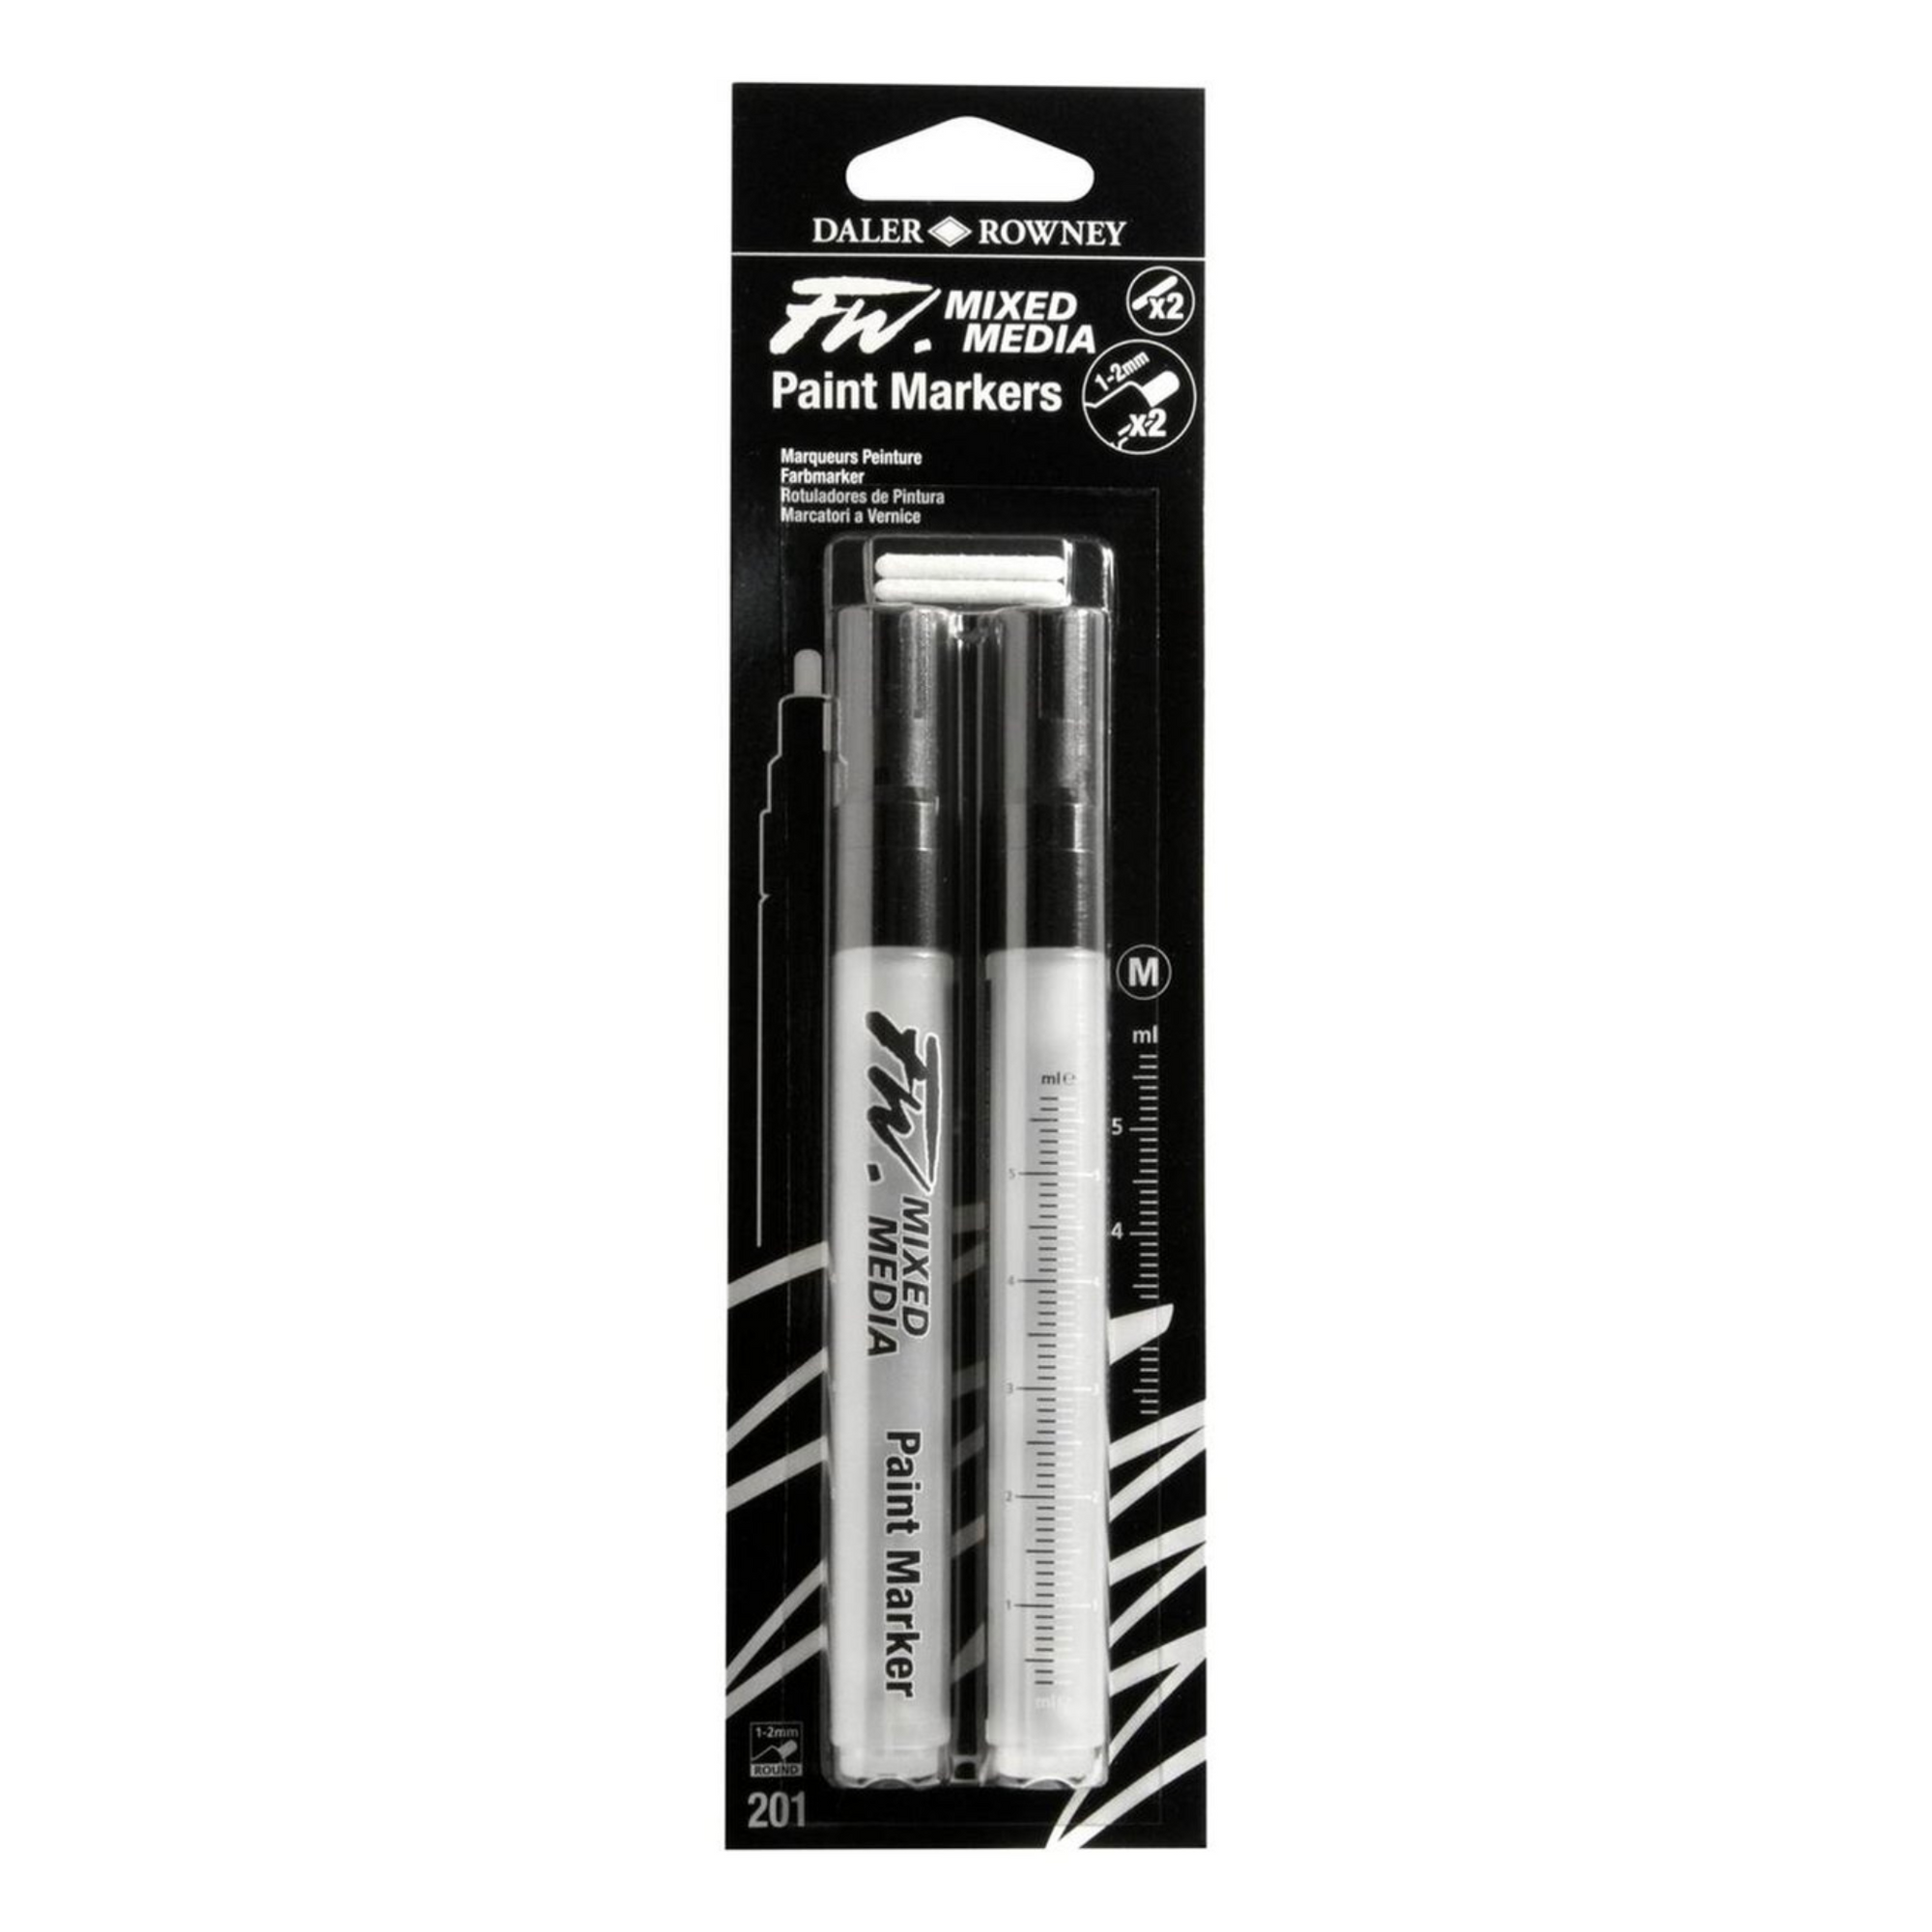 Daler-Rowney FW Medium Round Mixed Media Markers and Nibs 1-2mm 2 Pack